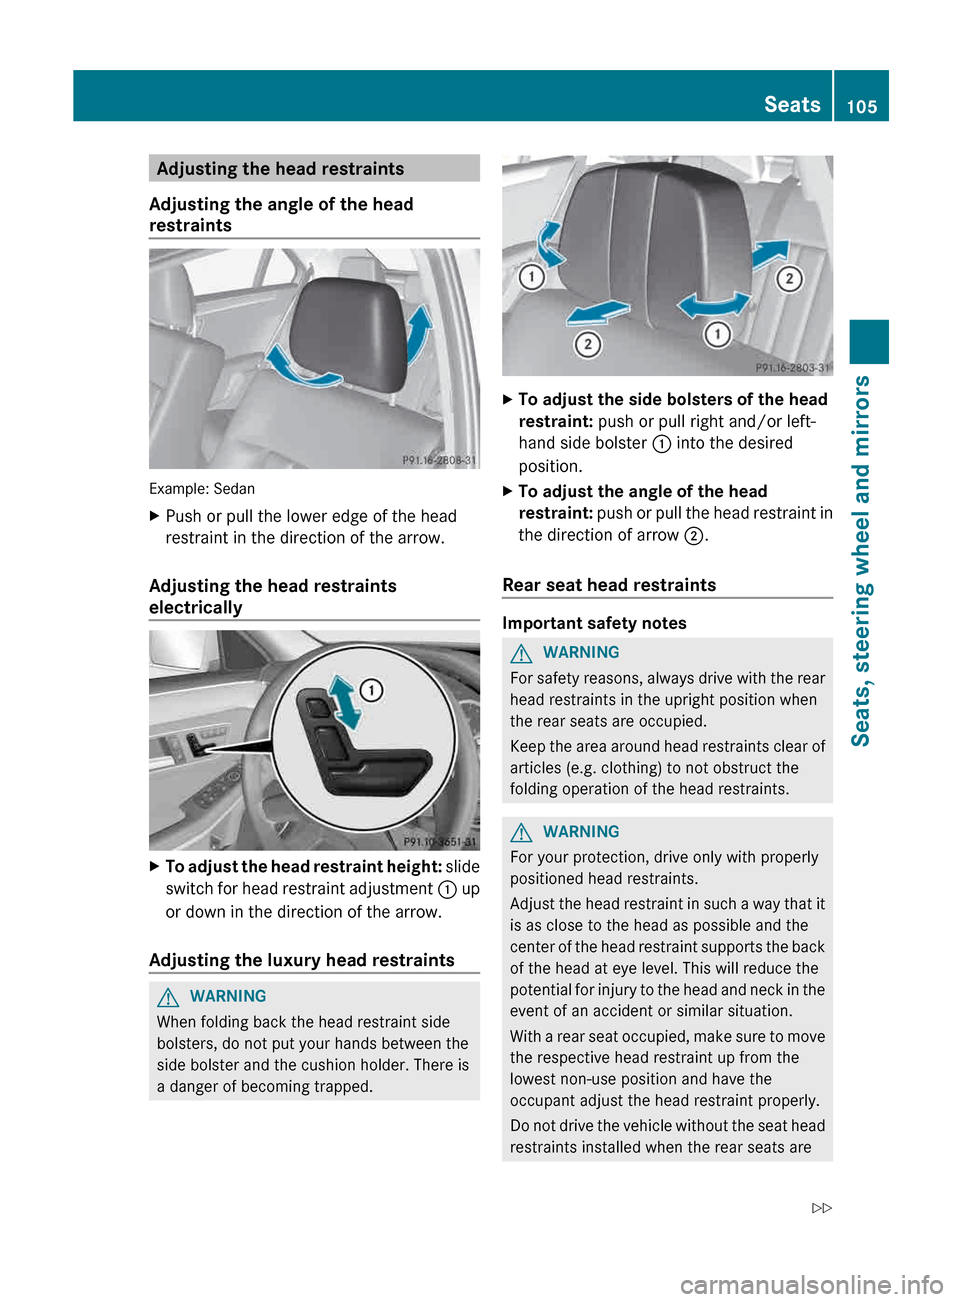 MERCEDES-BENZ E-Class SEDAN 2013 W212 Owners Manual Adjusting the head restraints
Adjusting the angle of the head
restraints Example: Sedan
X
Push or pull the lower edge of the head
restraint in the direction of the arrow.
Adjusting the head restraints